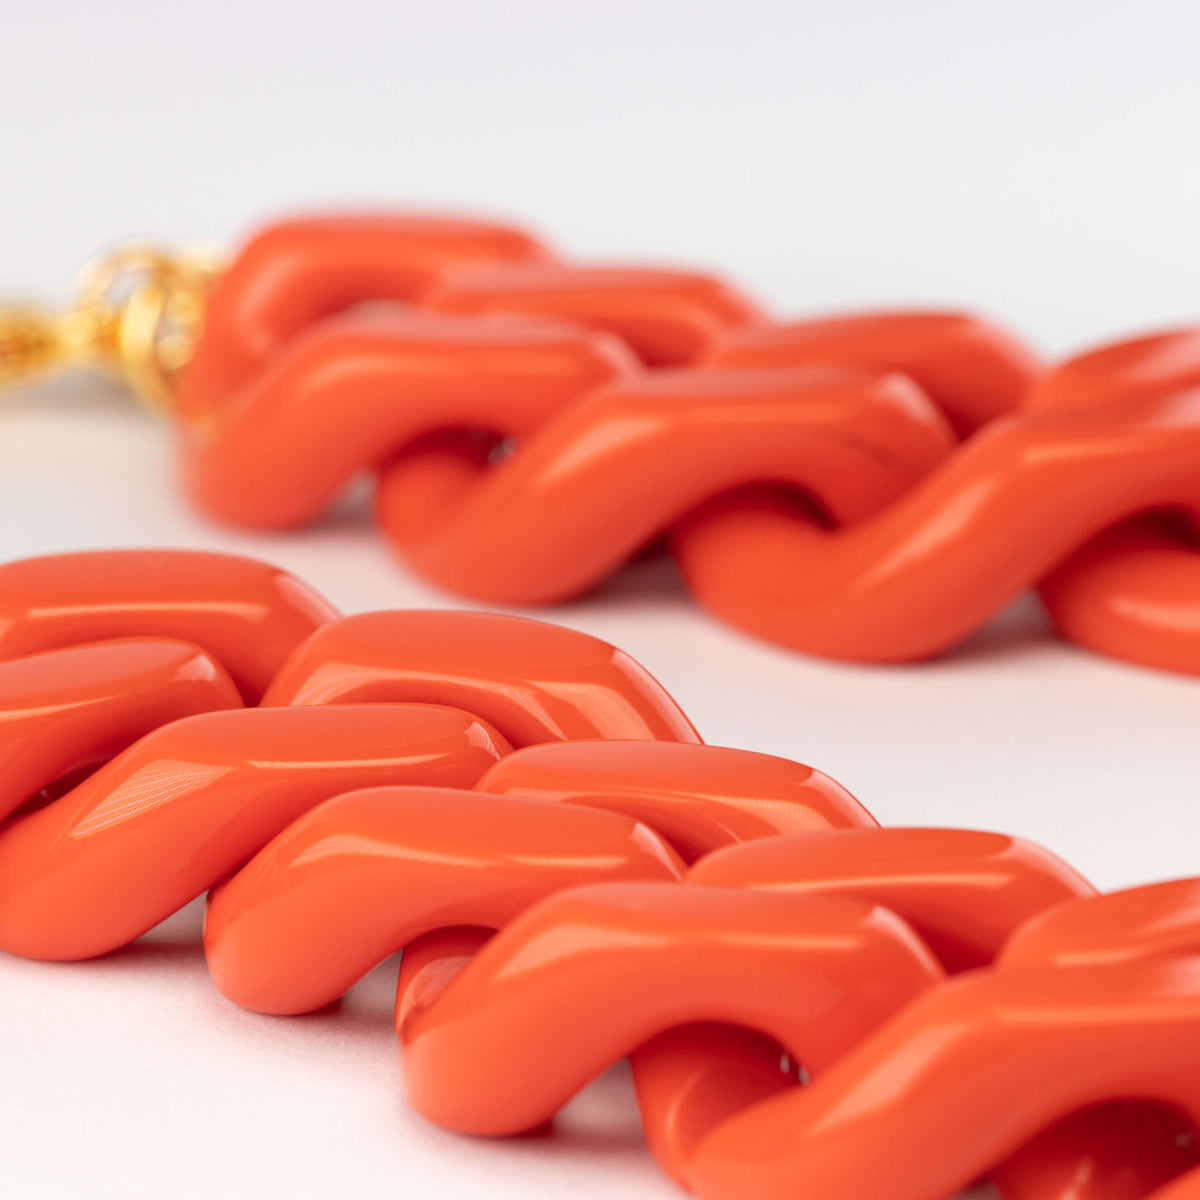 Flat Chain Necklace Coral